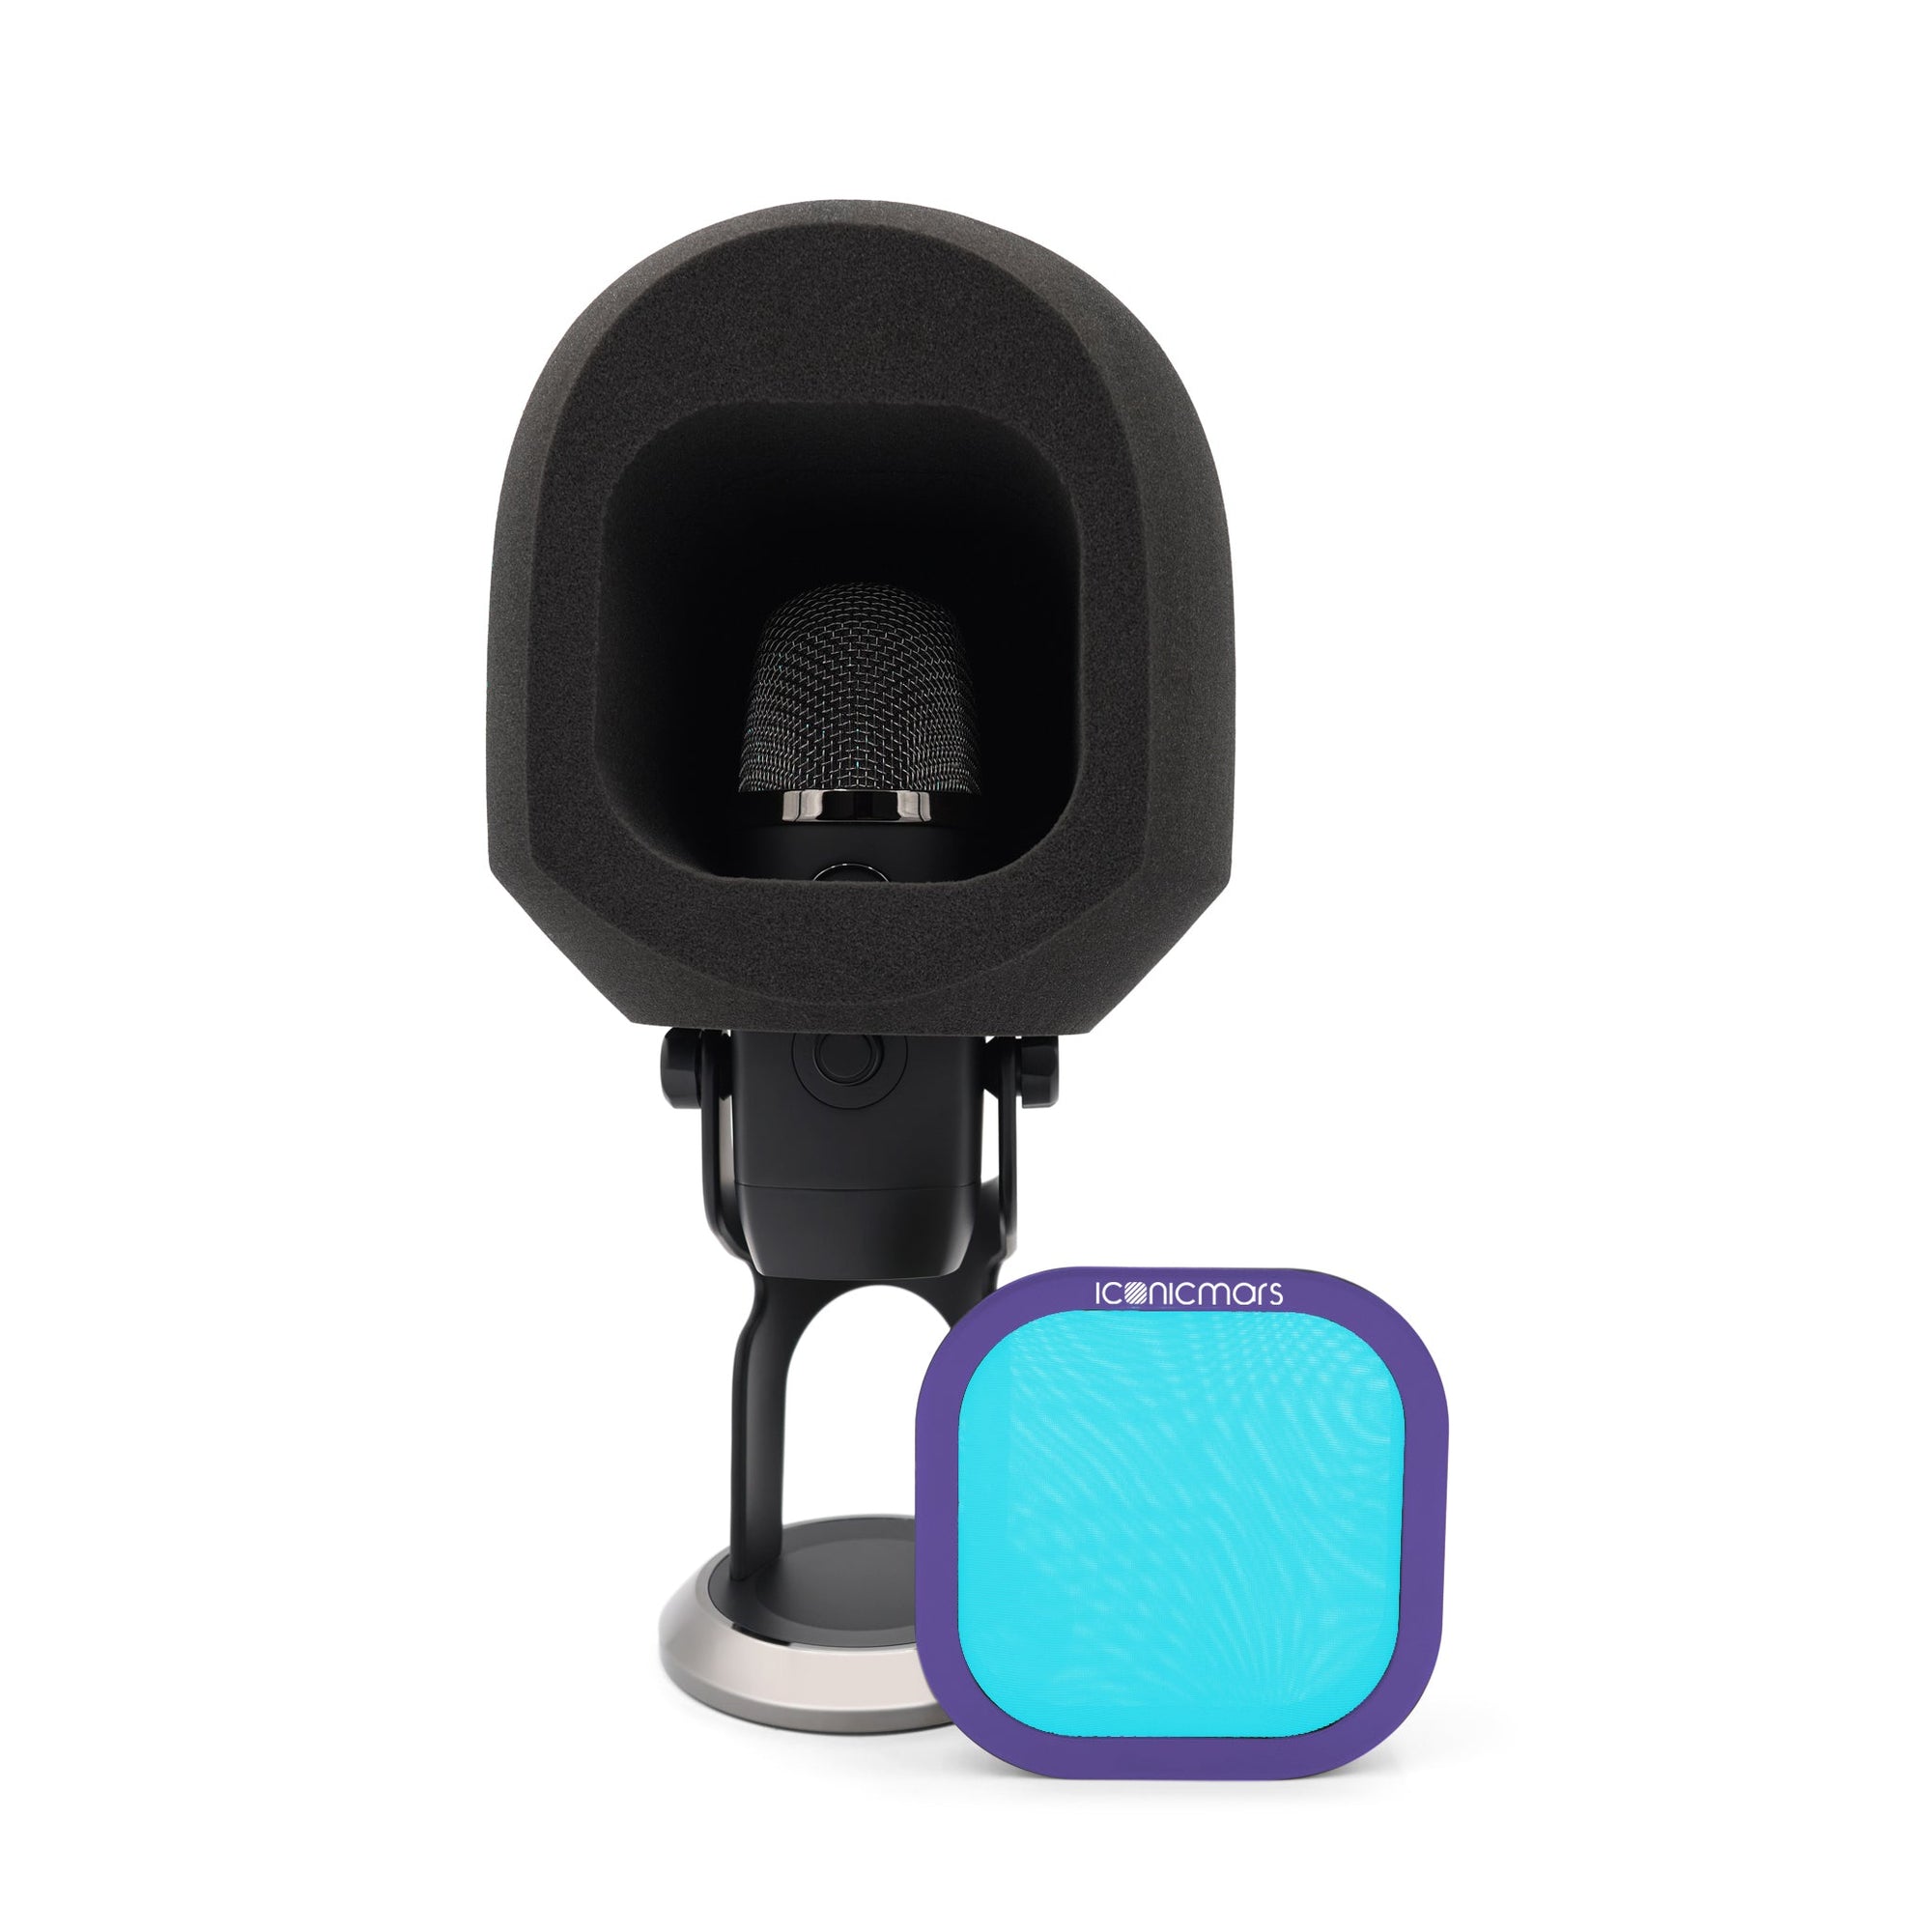 The Comet X Eye ball like isolation booth with pop filter off showing microphone acoustic isolation chamber  -- Lavender Sky